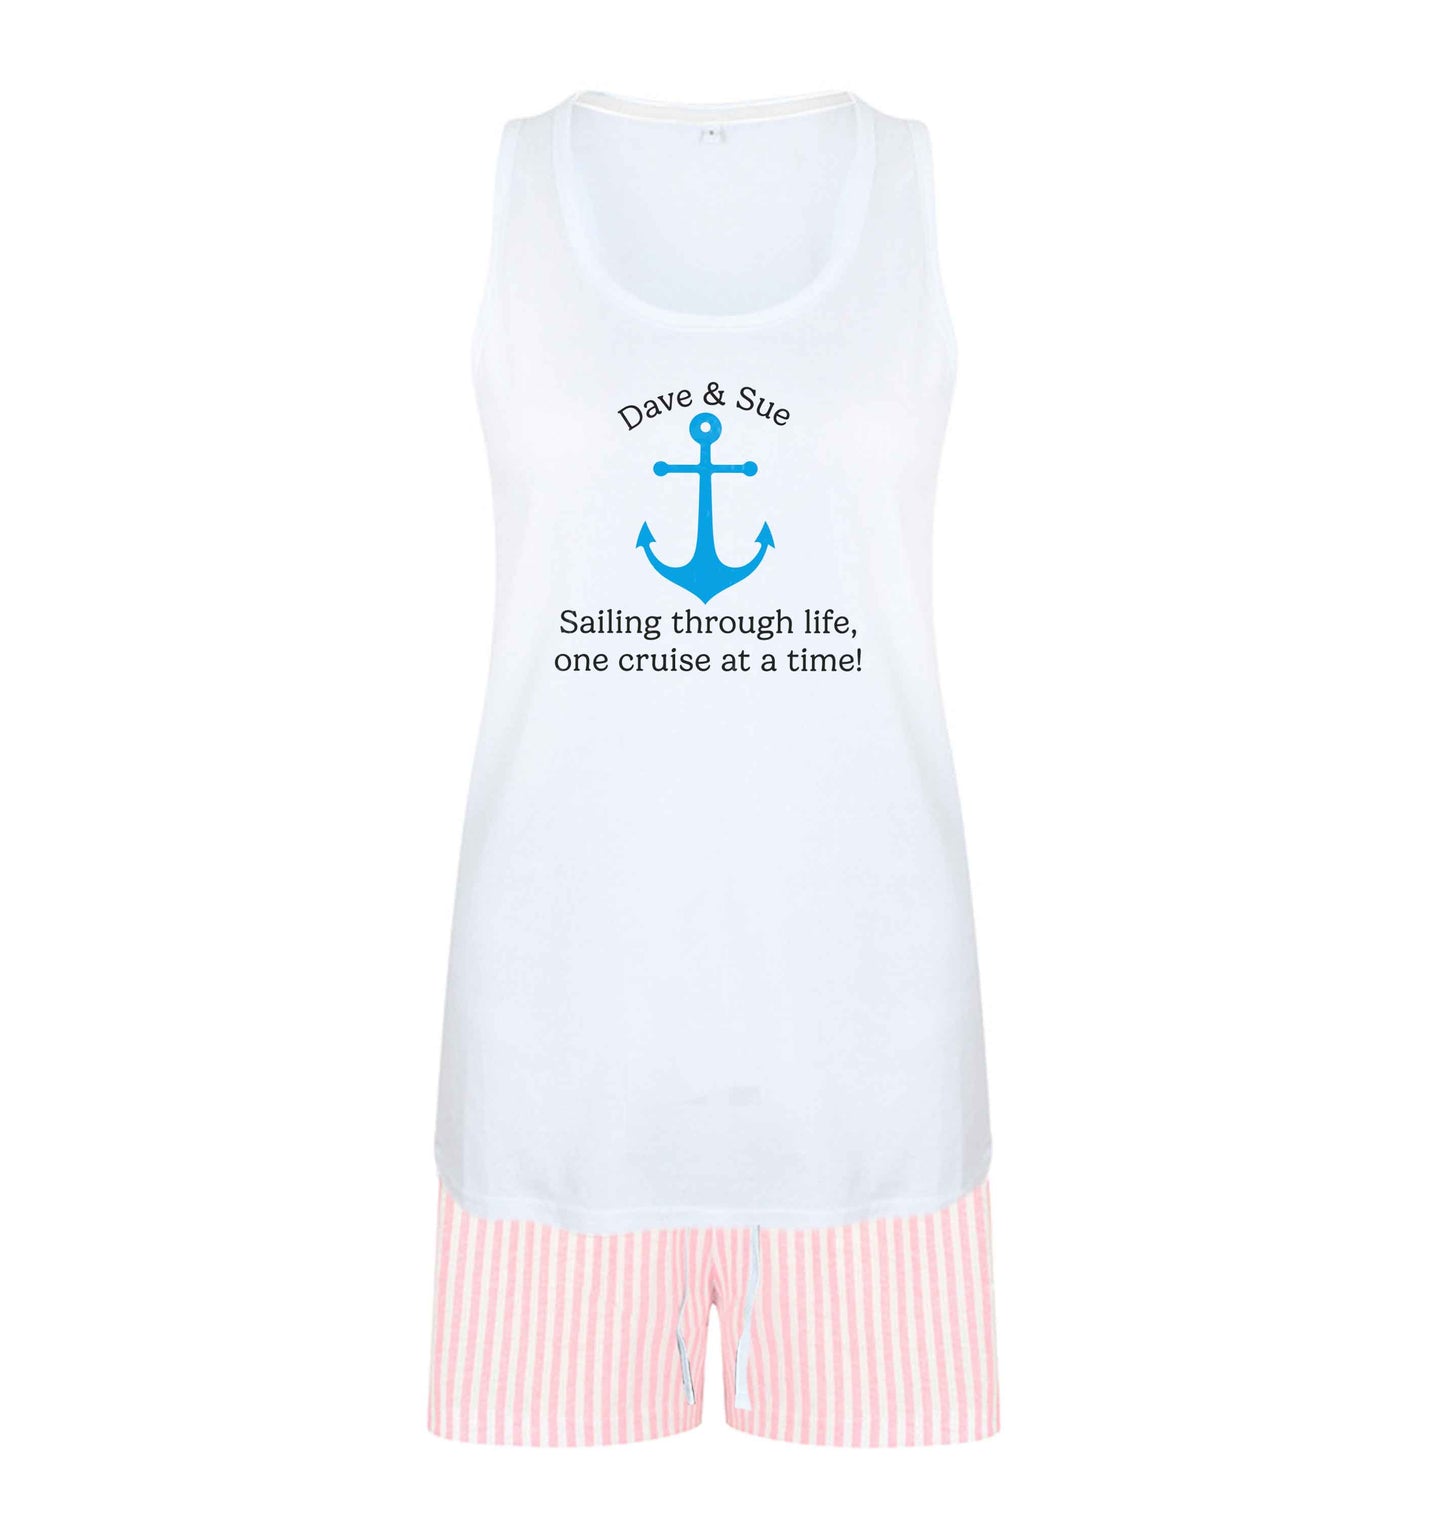 Sailing through life one cruise at a time - personalised size XL women's pyjama shorts set in pink 